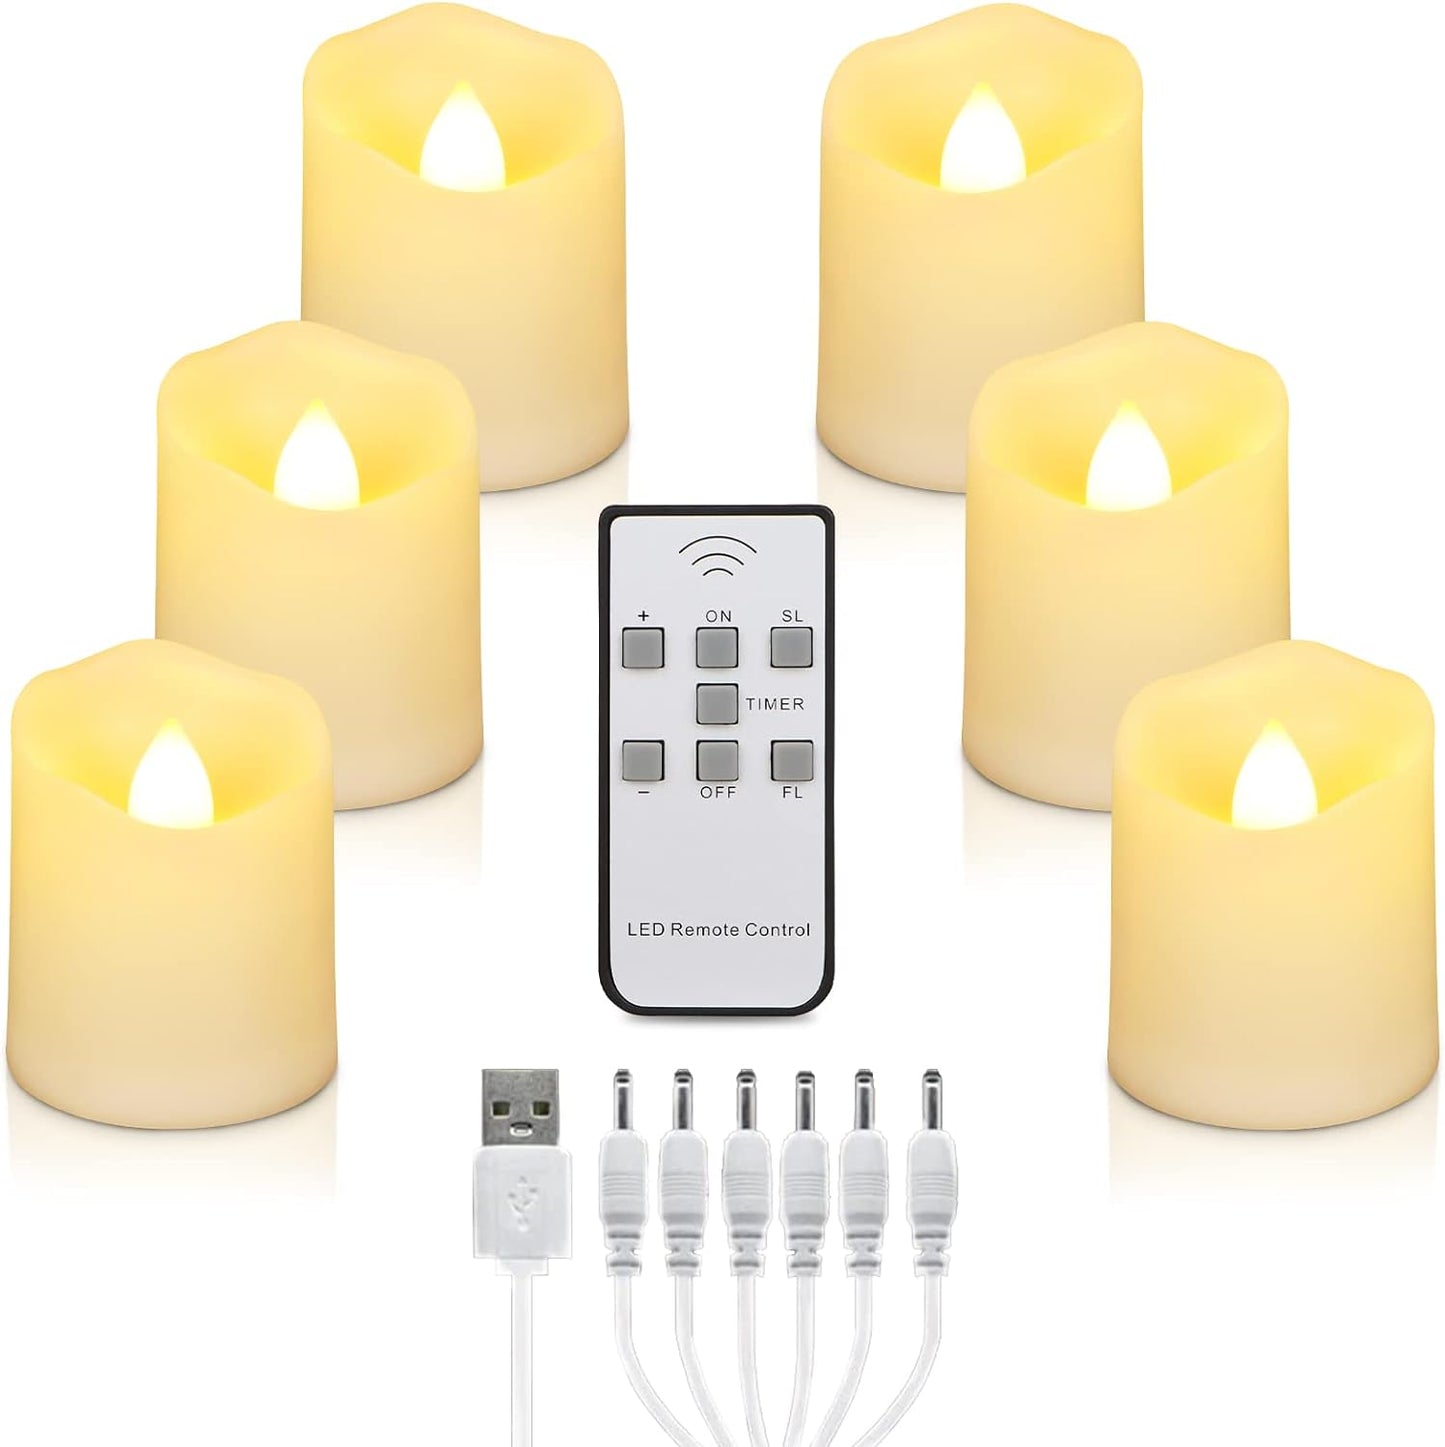 LED Tea Lights Rechargeable Candles with USB Charging Cable, 6 PCS Votive Tea Light with Remote, Flameless Flickering Warm White Tealights Candle for Halloween, Pumpkin Light, Christmas Decoration